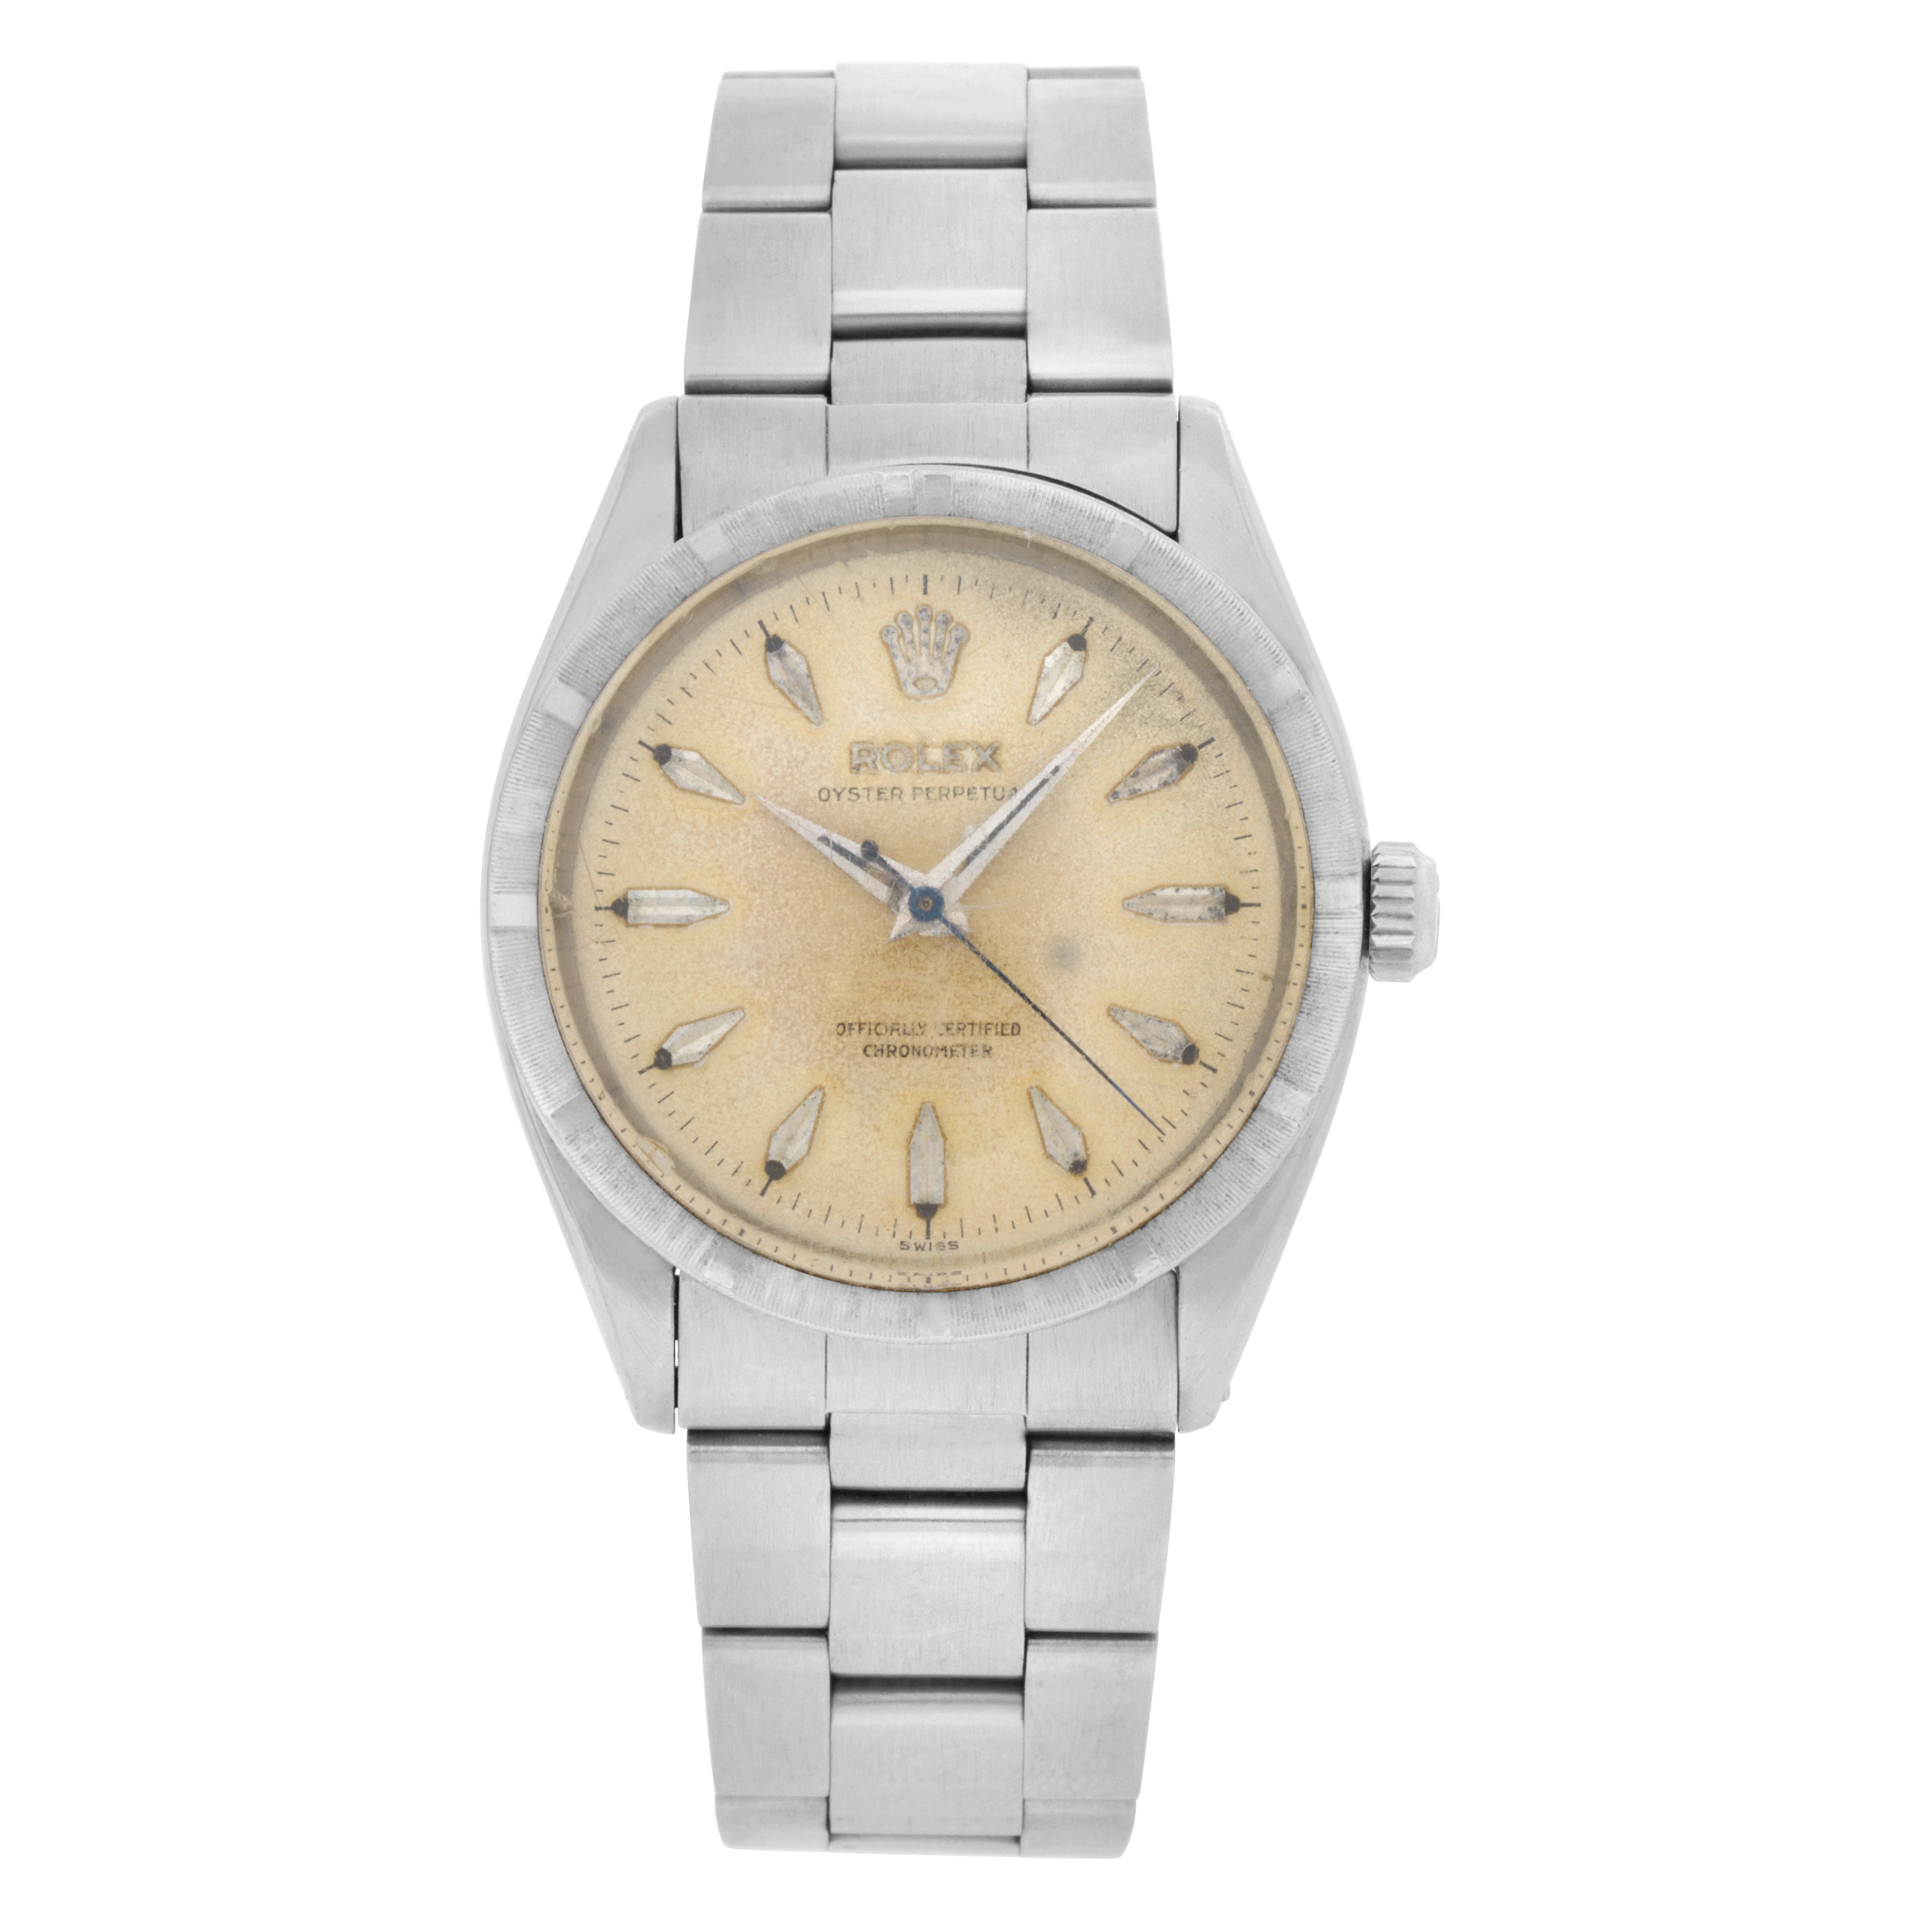 Rolex Oyster Perpetual 34mm 6569 image 1